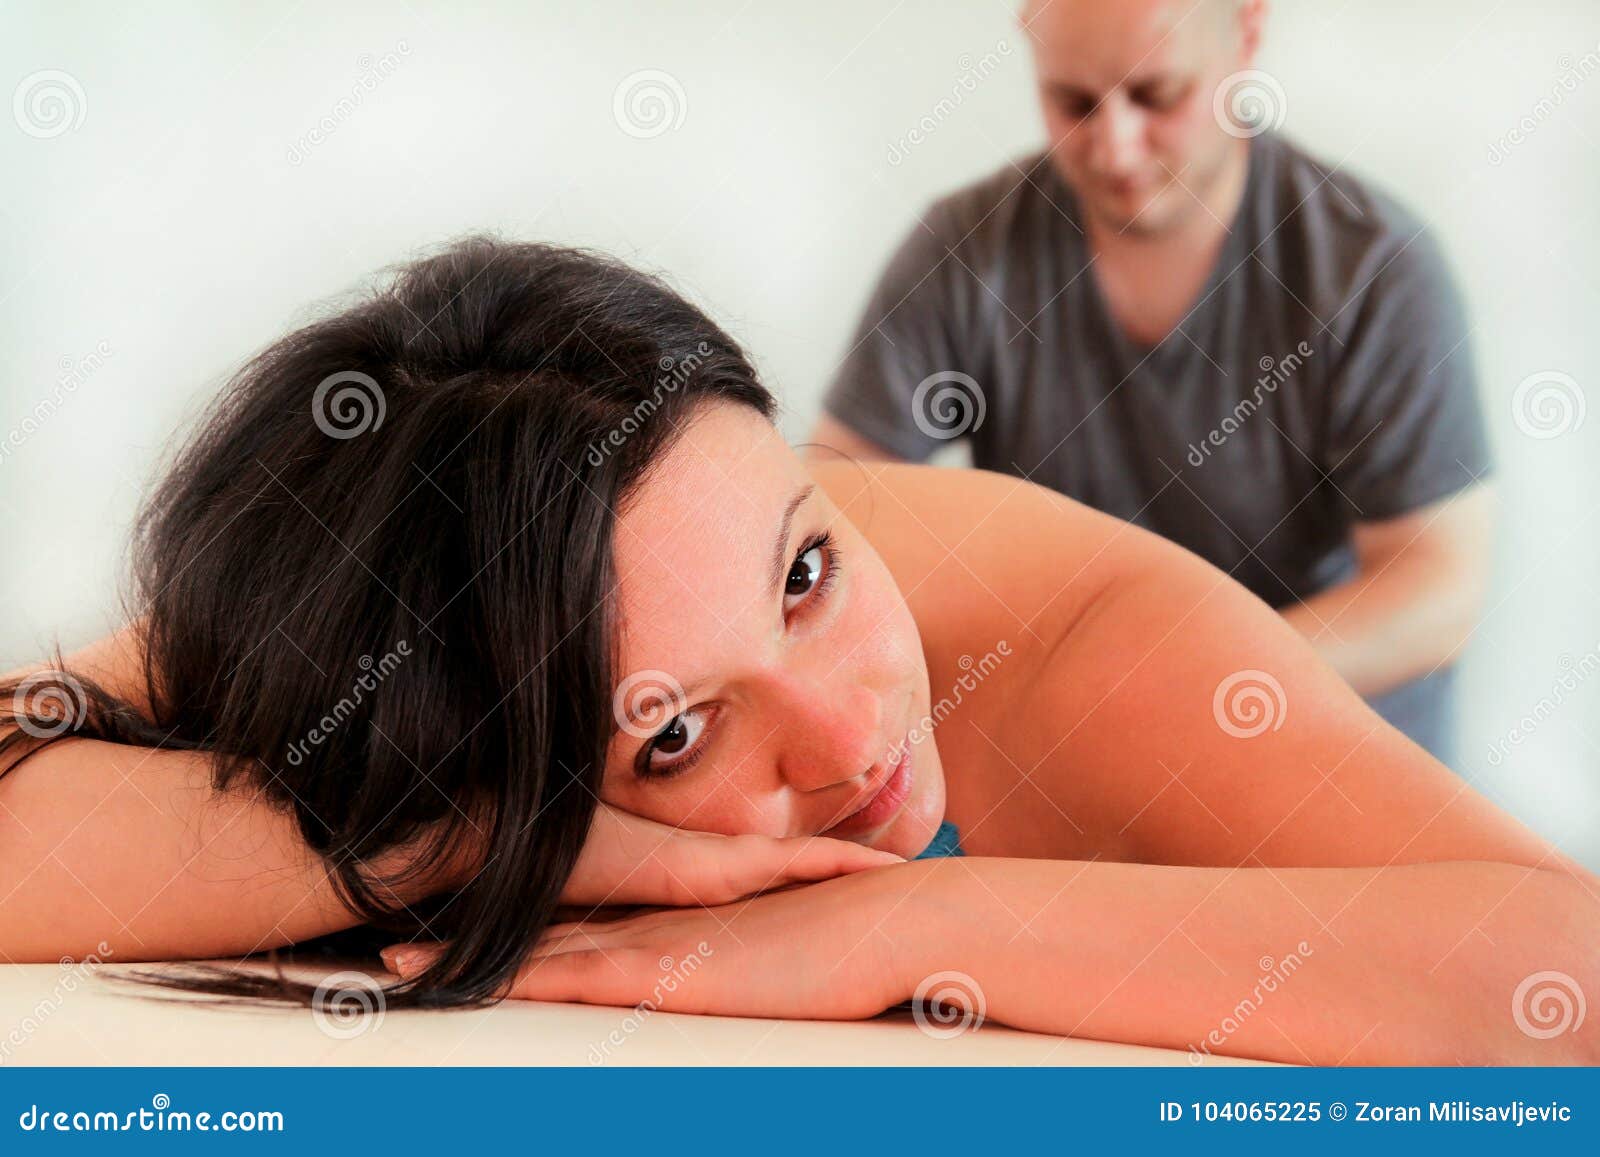 Woman Laying On Massage Table And Having A Massage Foot Stock Image